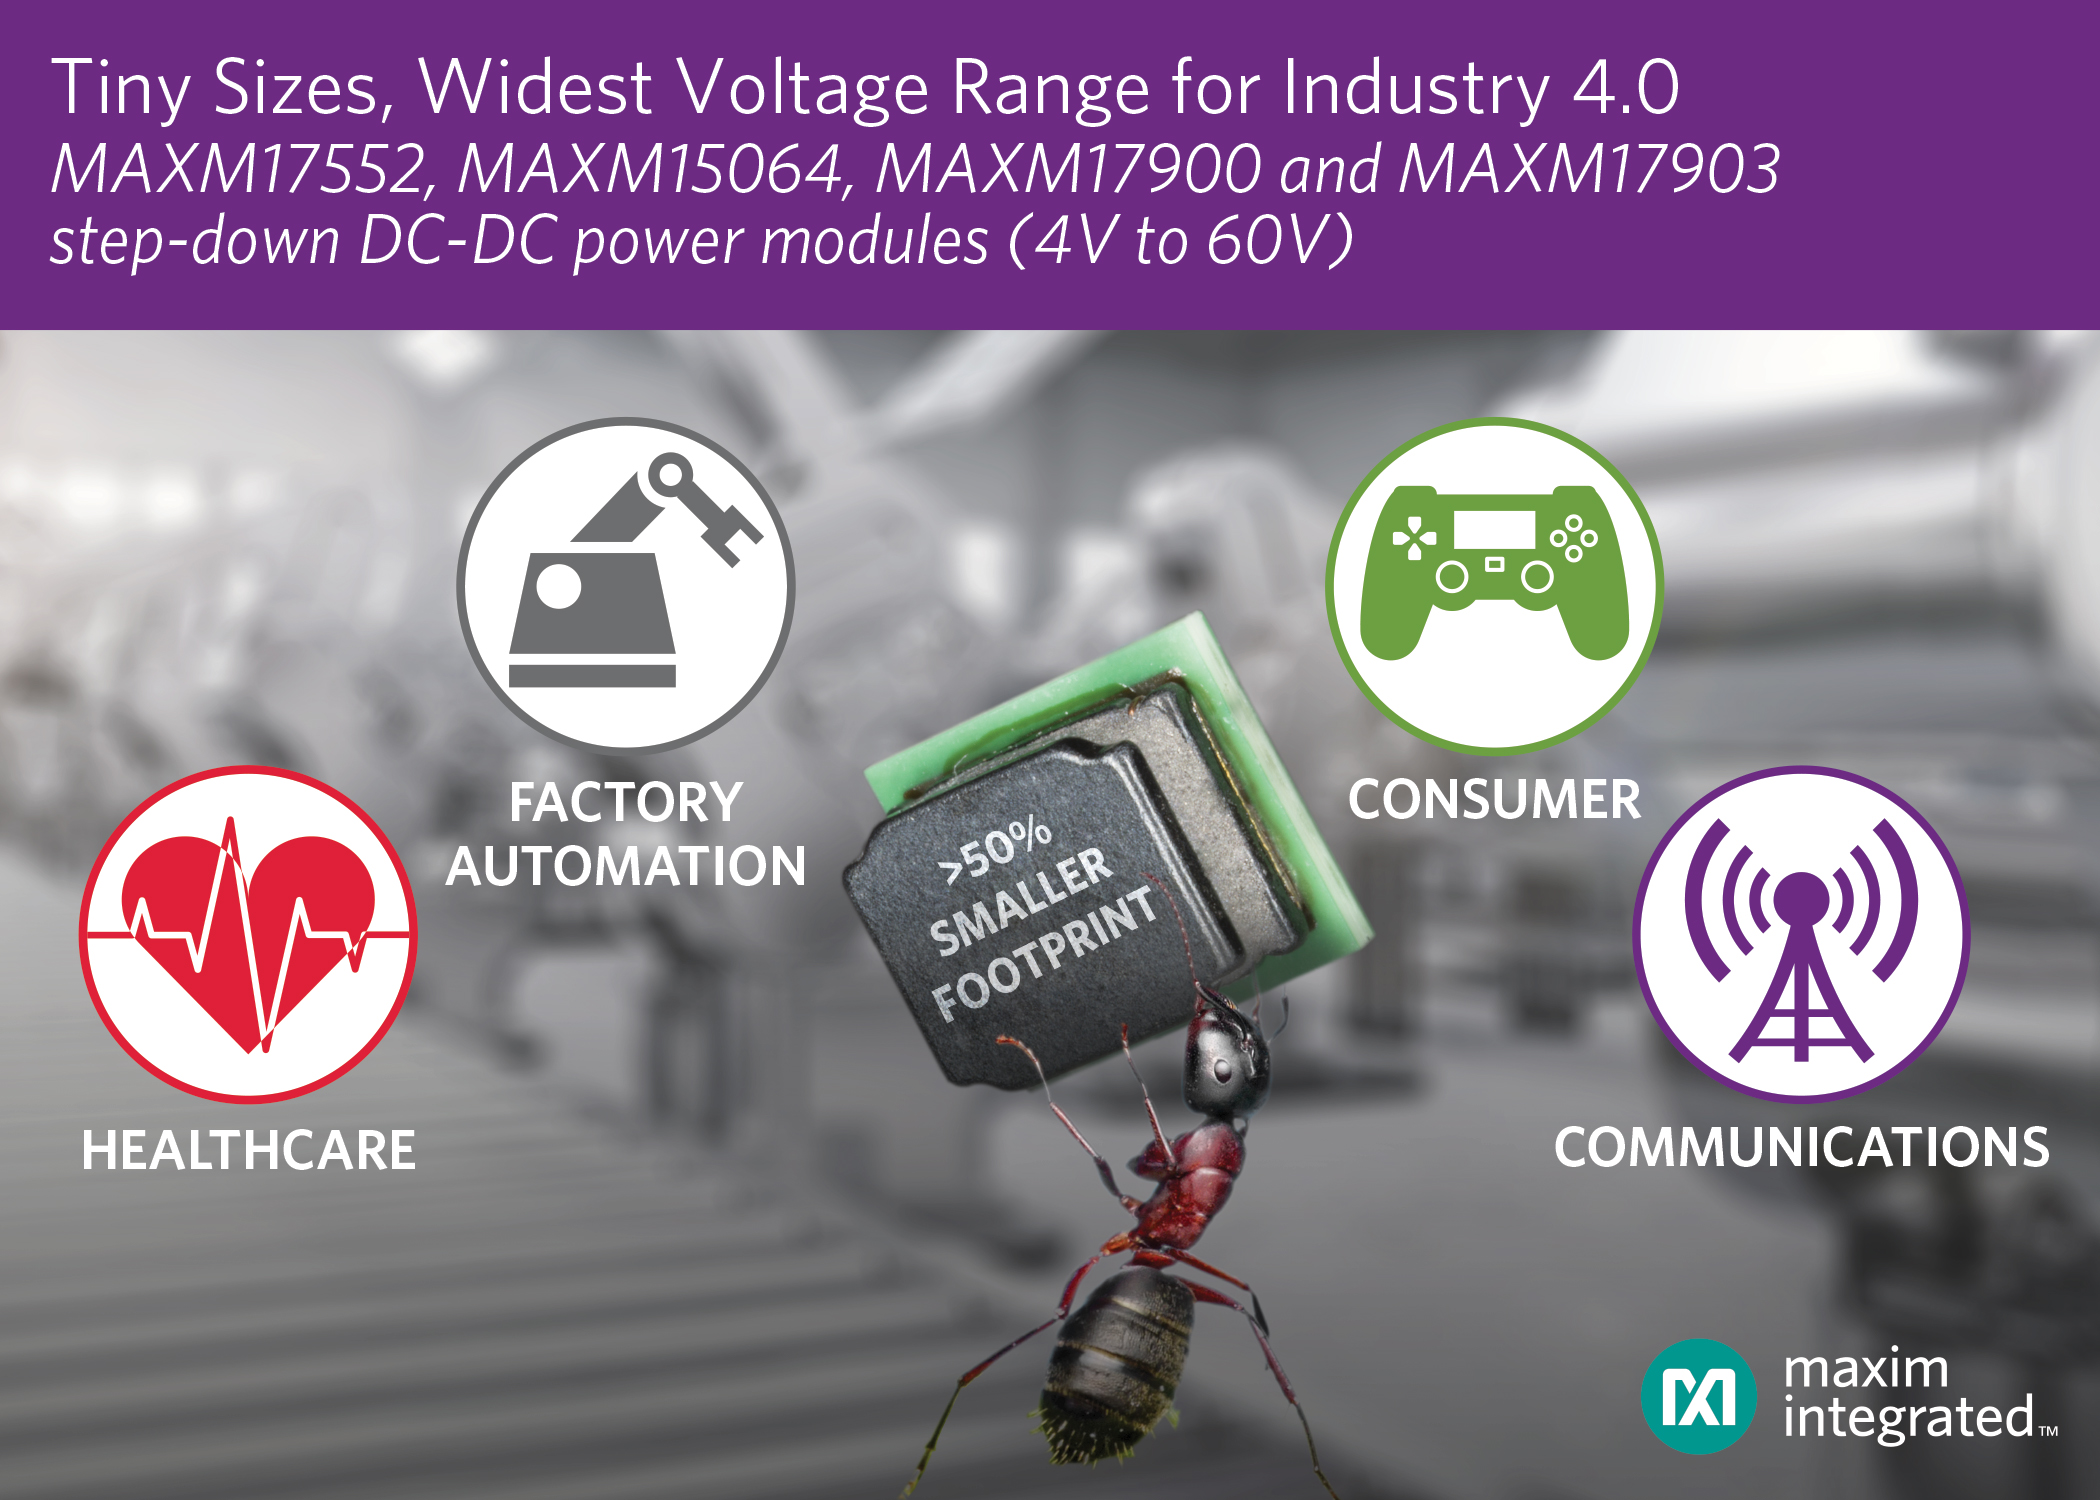 Ultra-Small DC-DC Power Modules Provide Voltages up to 60V